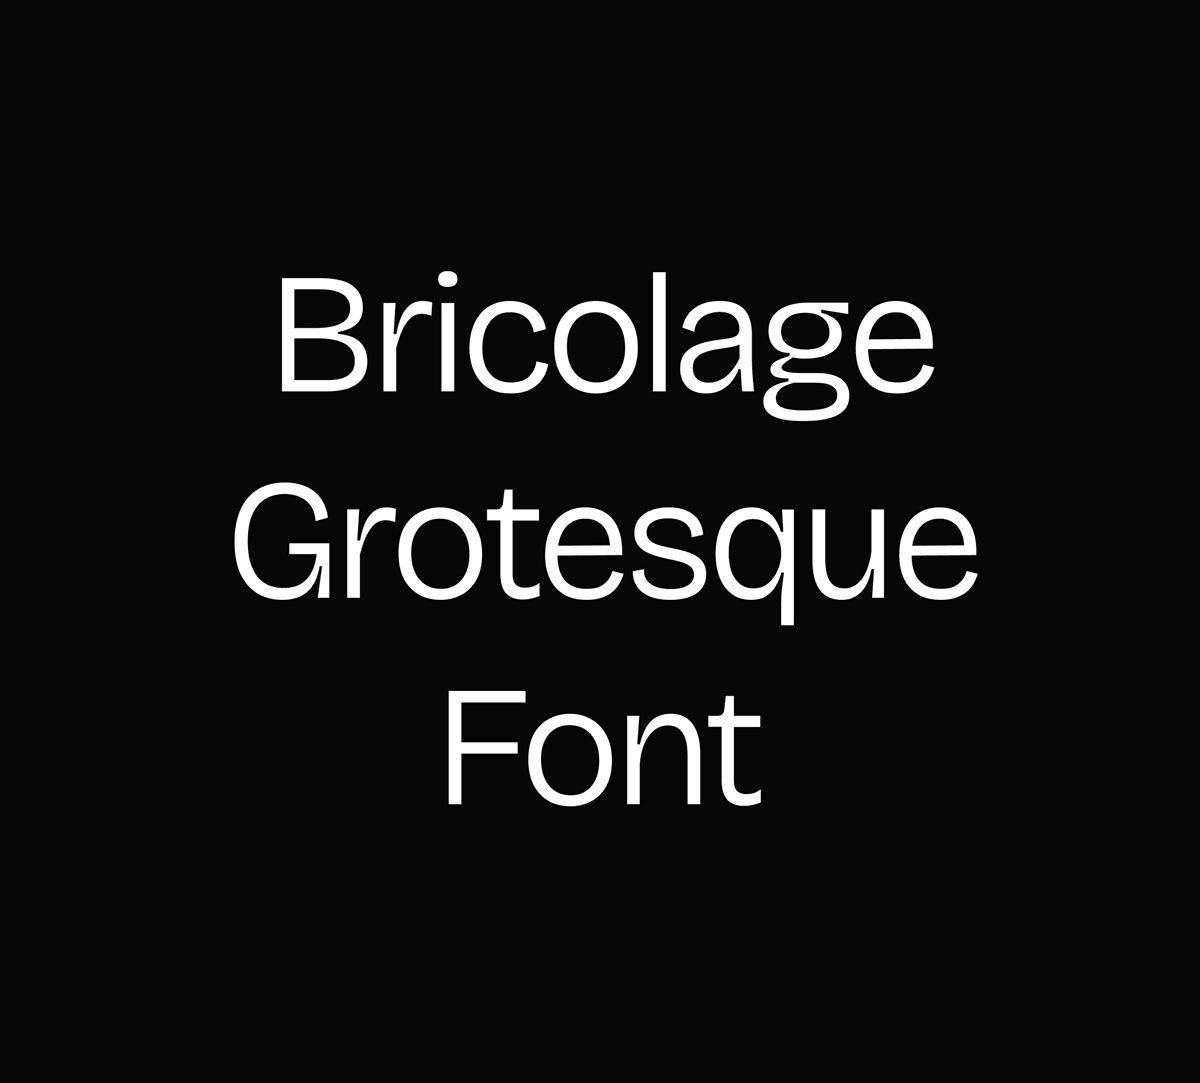 Bricolage Grotesque Font rendition image